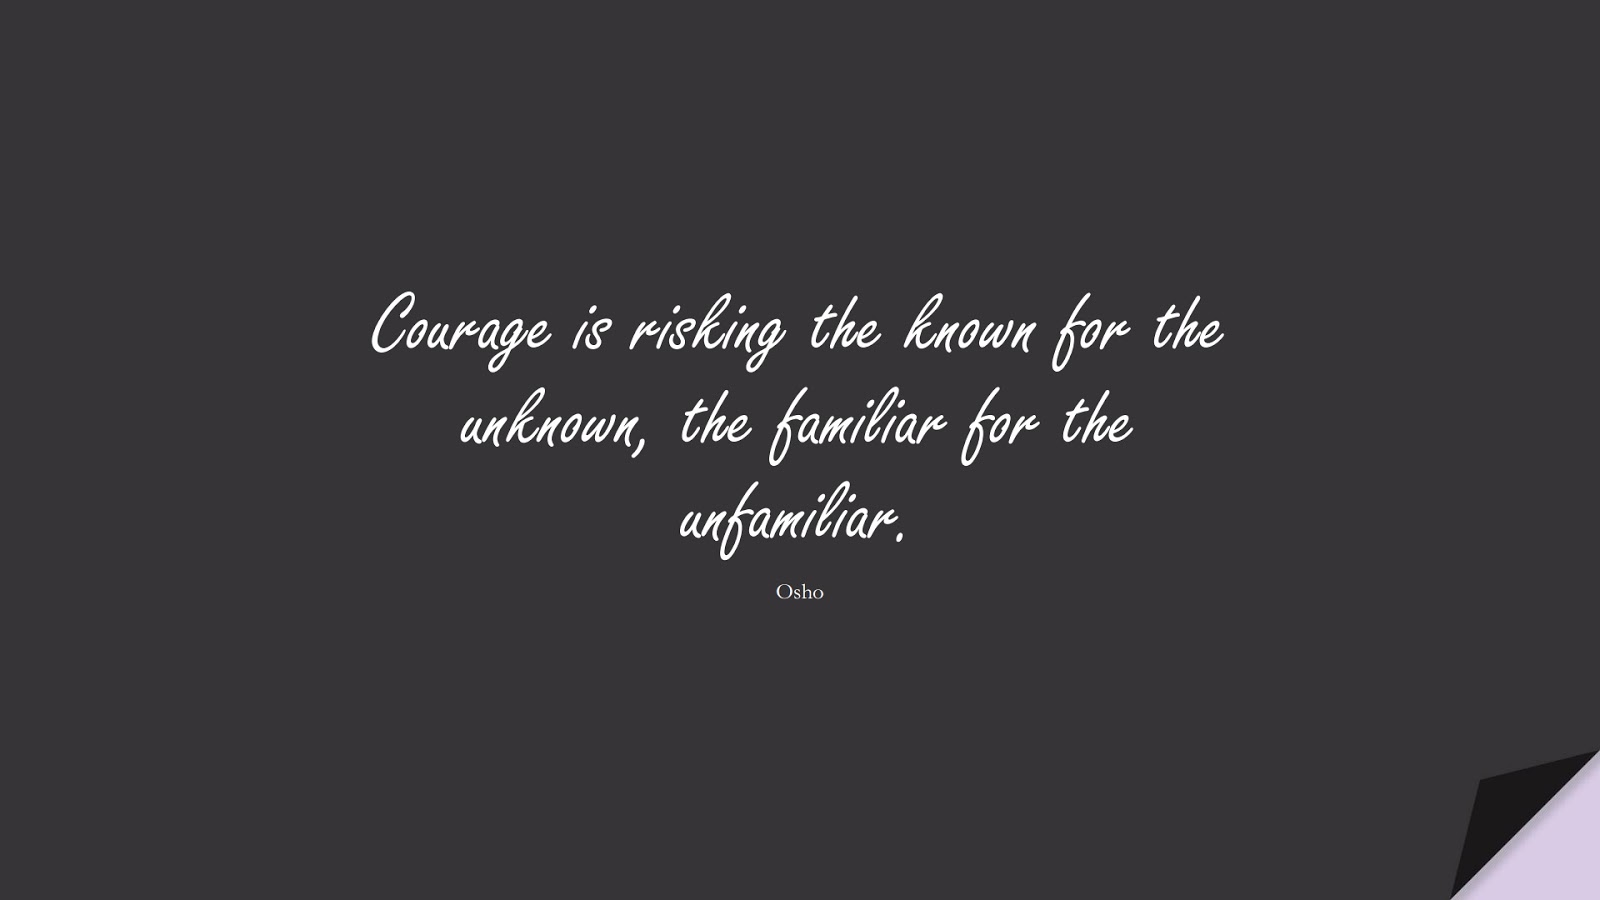 Courage is risking the known for the unknown, the familiar for the unfamiliar. (Osho);  #CourageQuotes